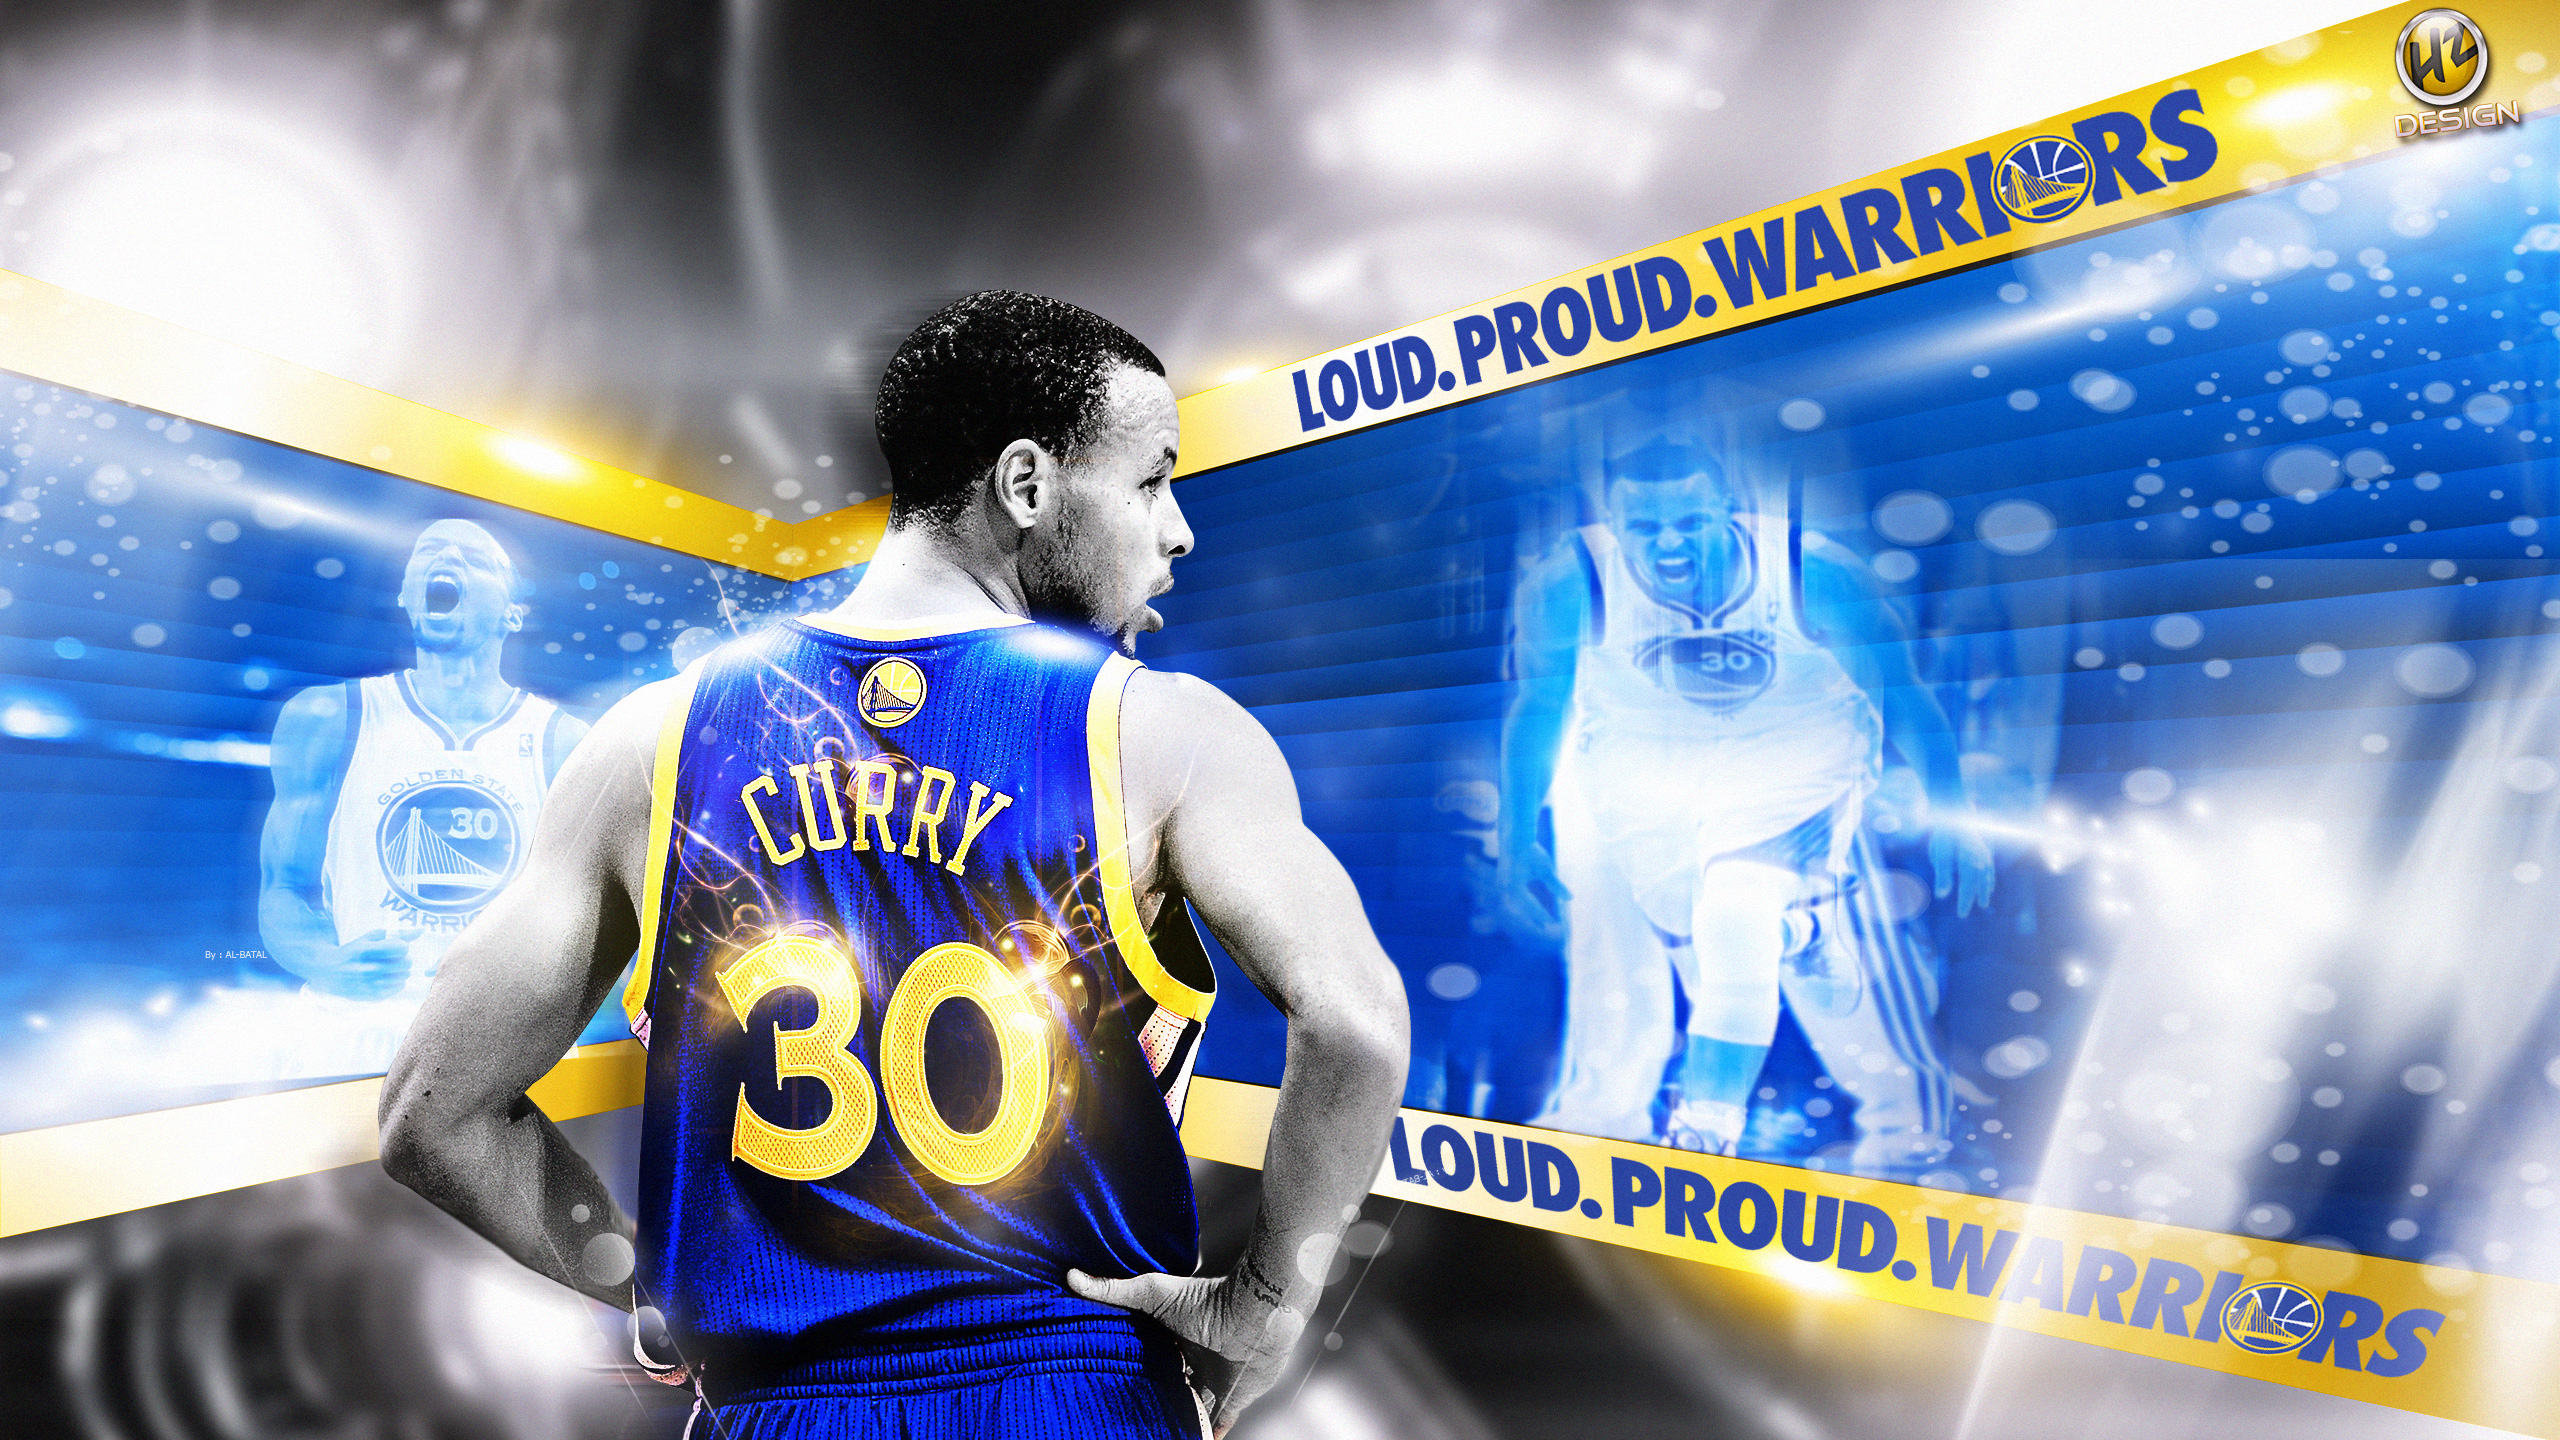 Stephen Curry Wallpaper iPhone The Art Mad